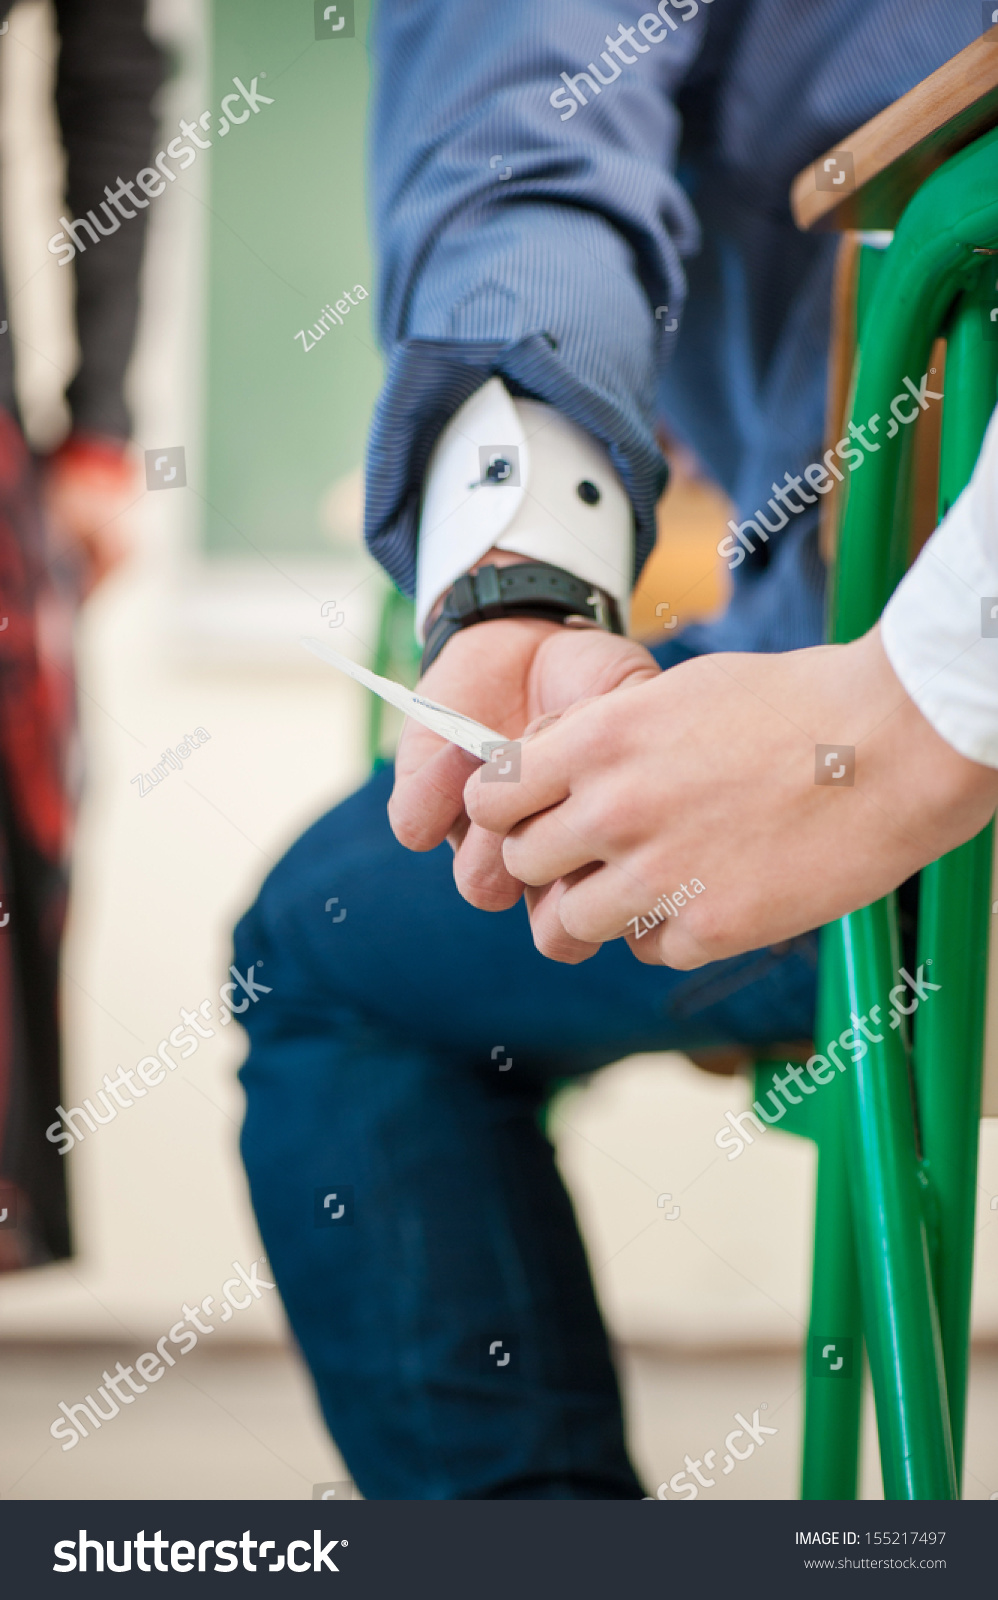 student-giving-cheatsheet-his-colleague-while-stock-photo-155217497